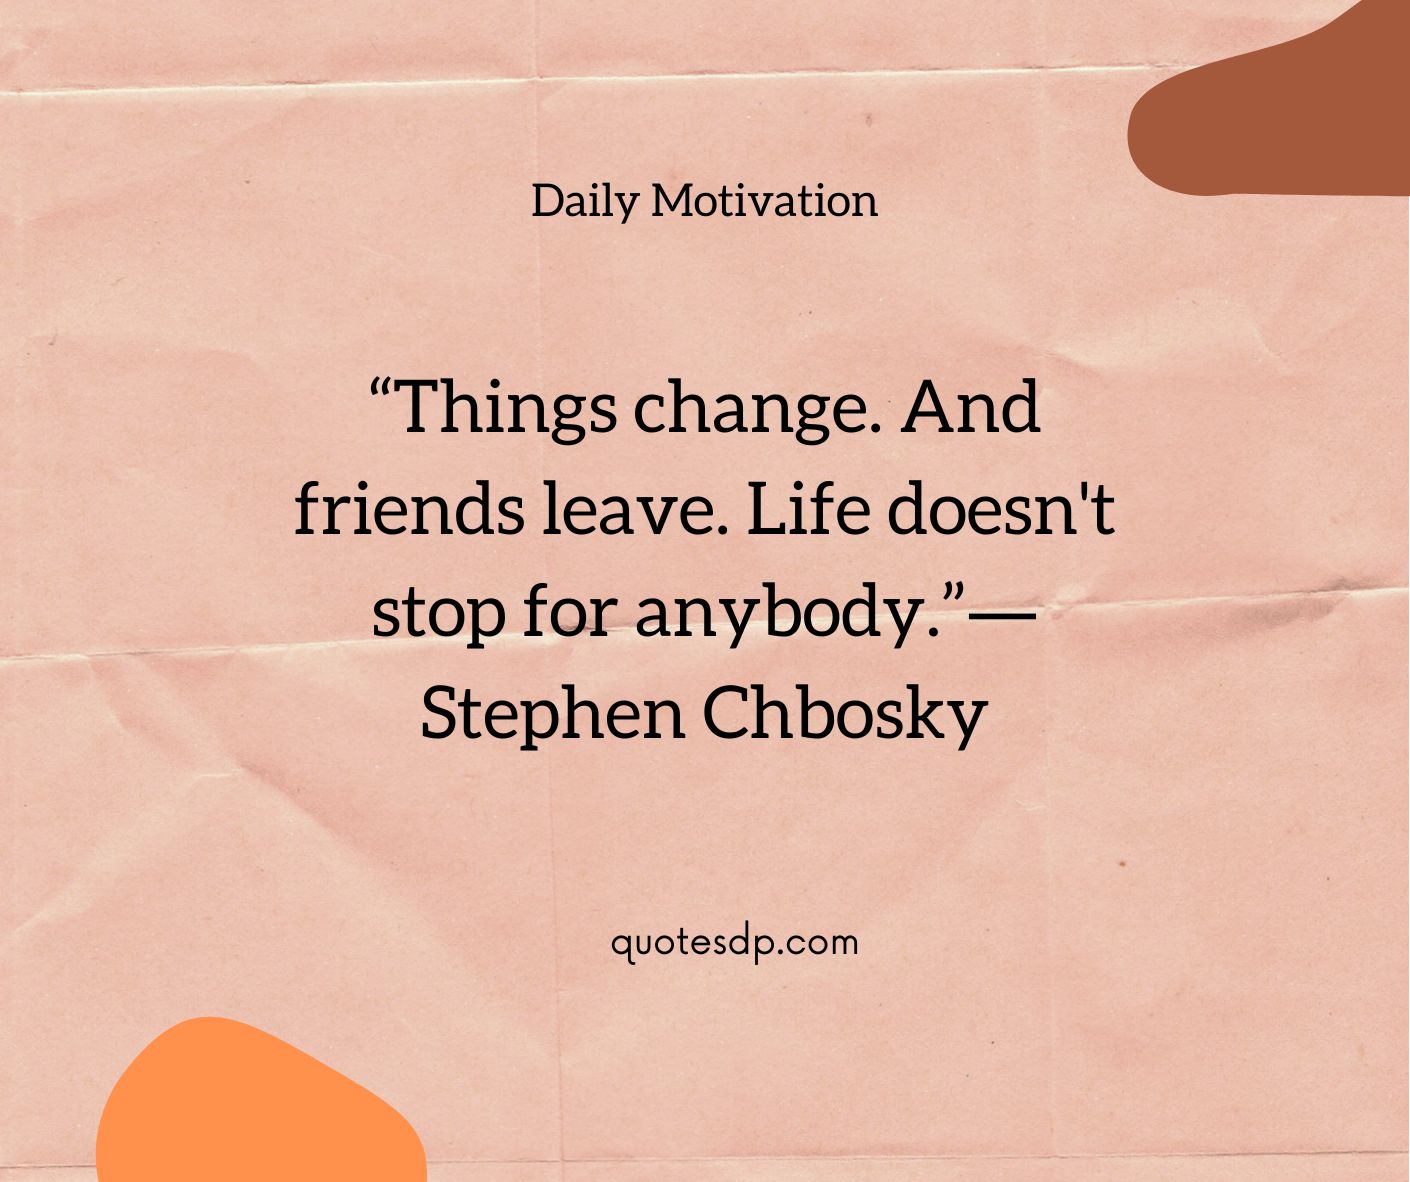 Stephen Chbosky life quotes life doesn’t stop